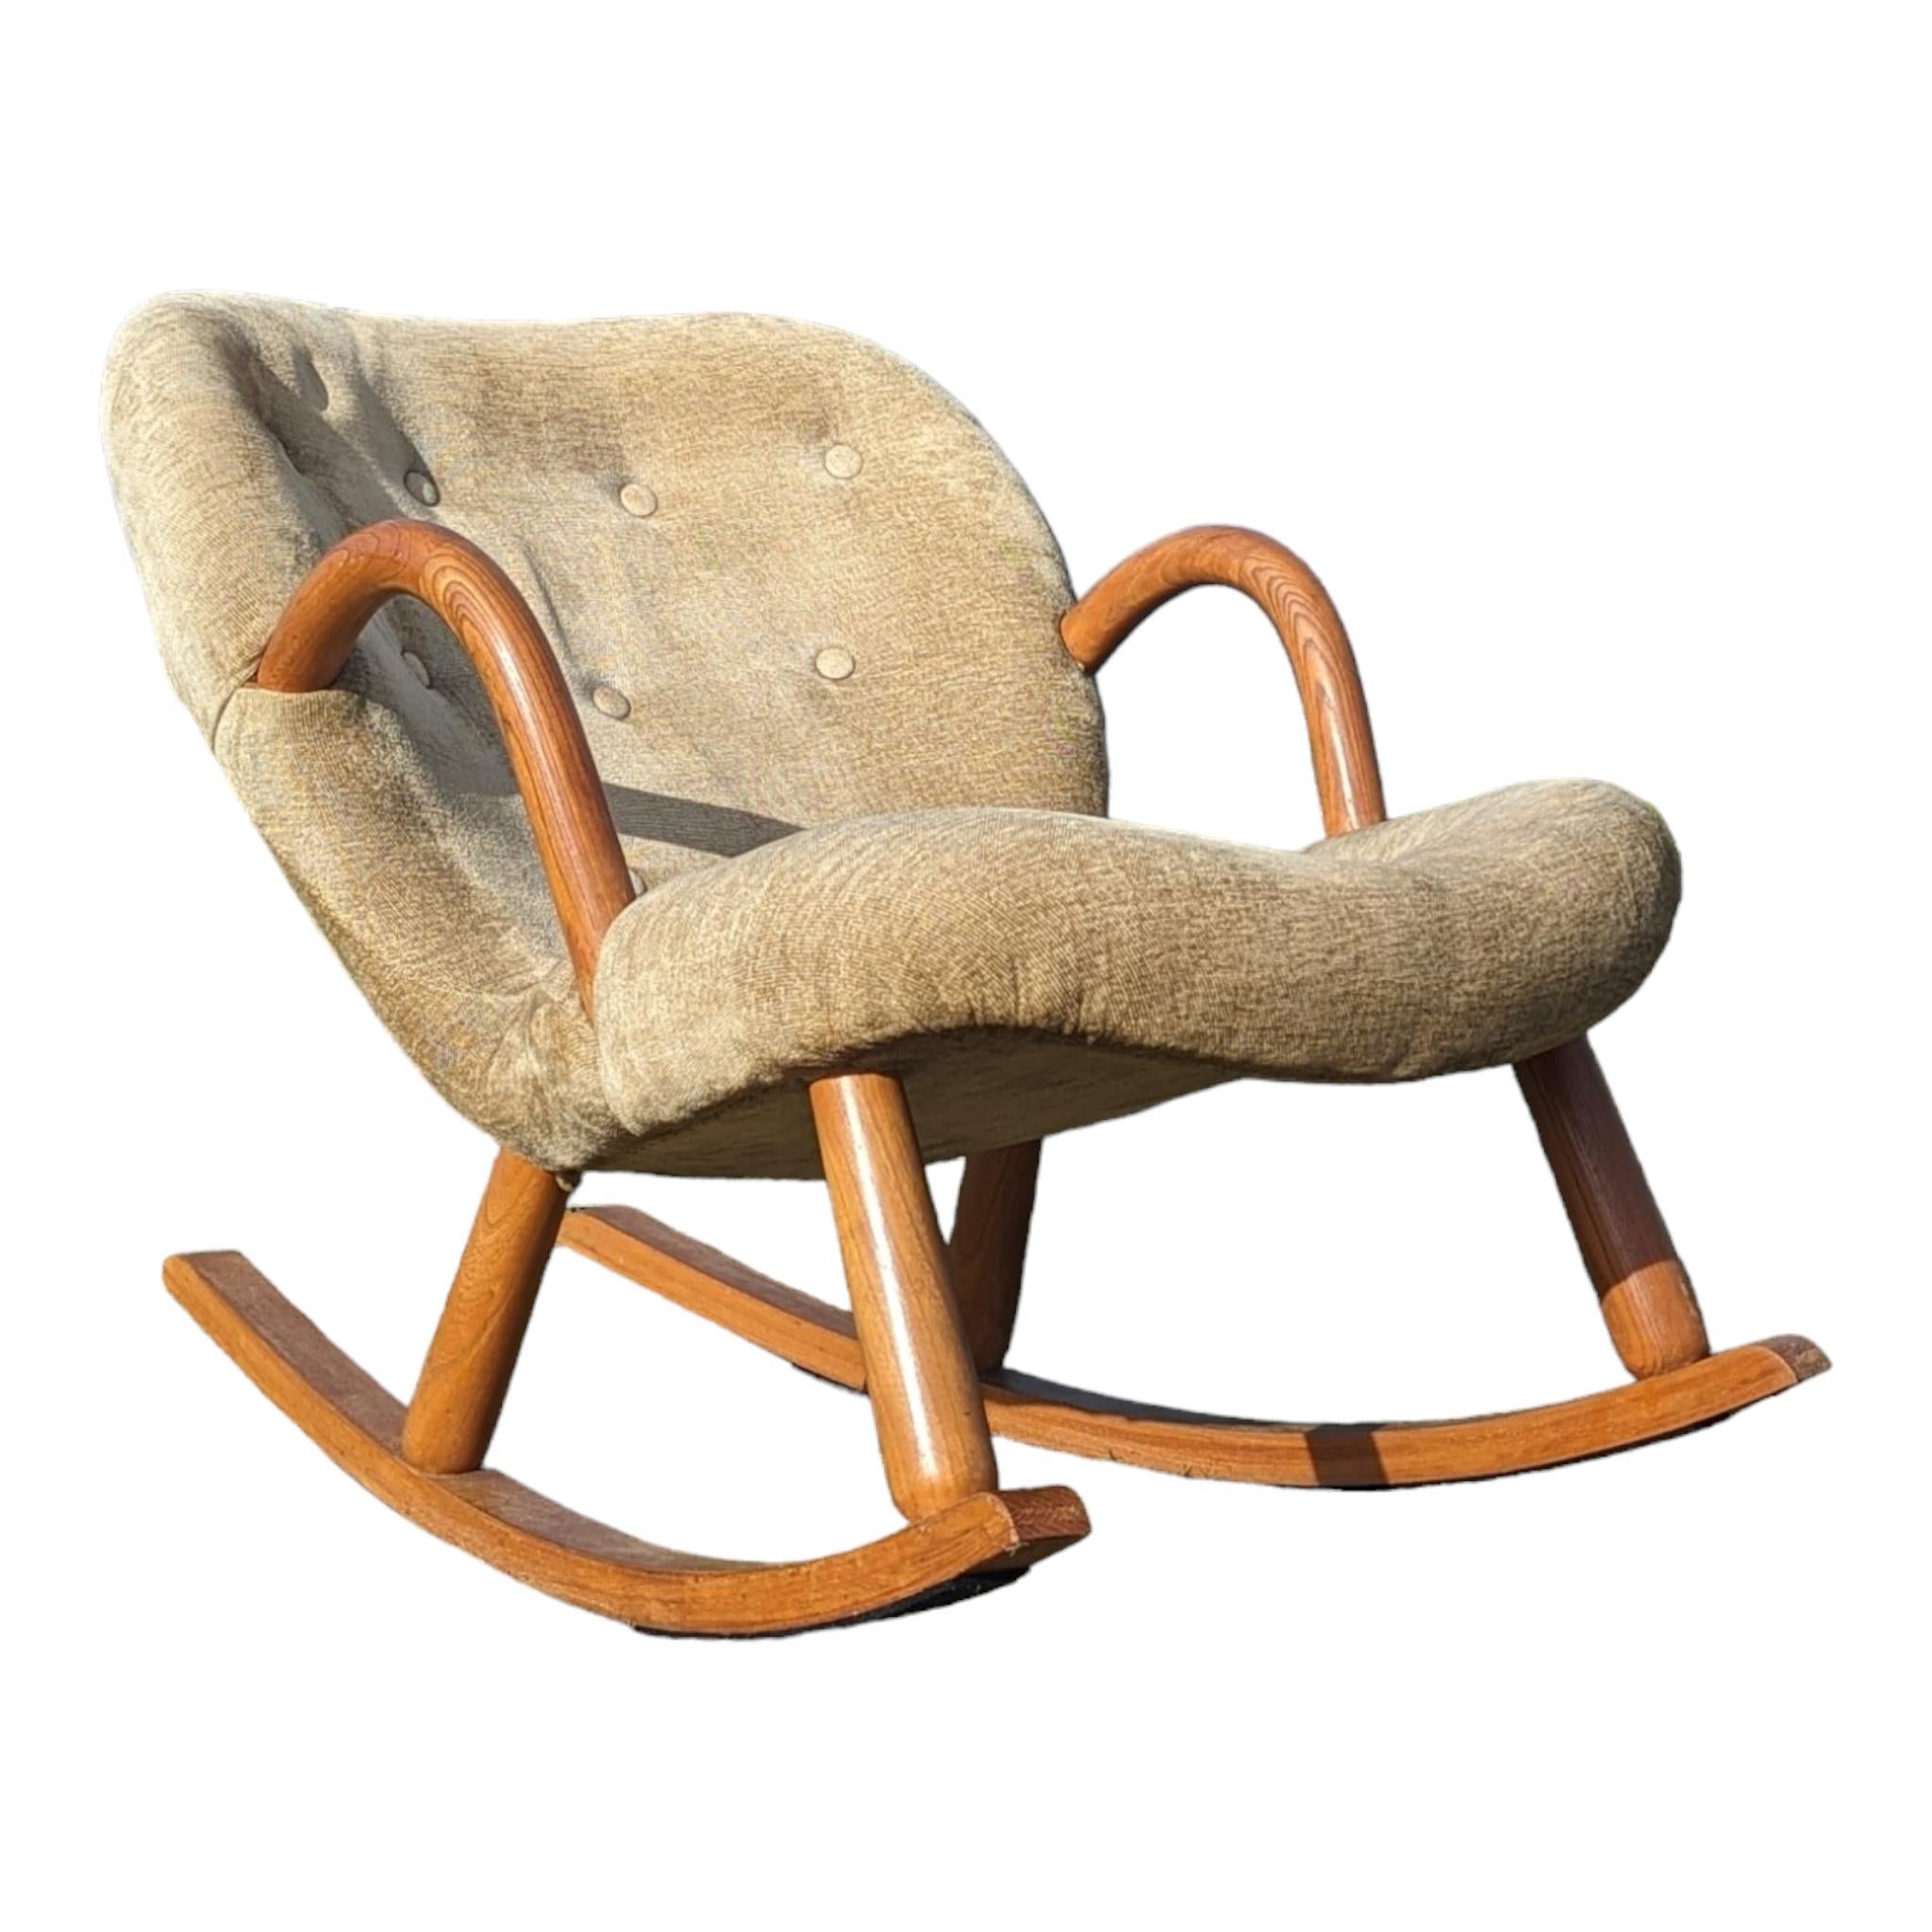 Rare Arnold Madsen Attributed Clam Rocking Chair circa 1960s For Sale 1